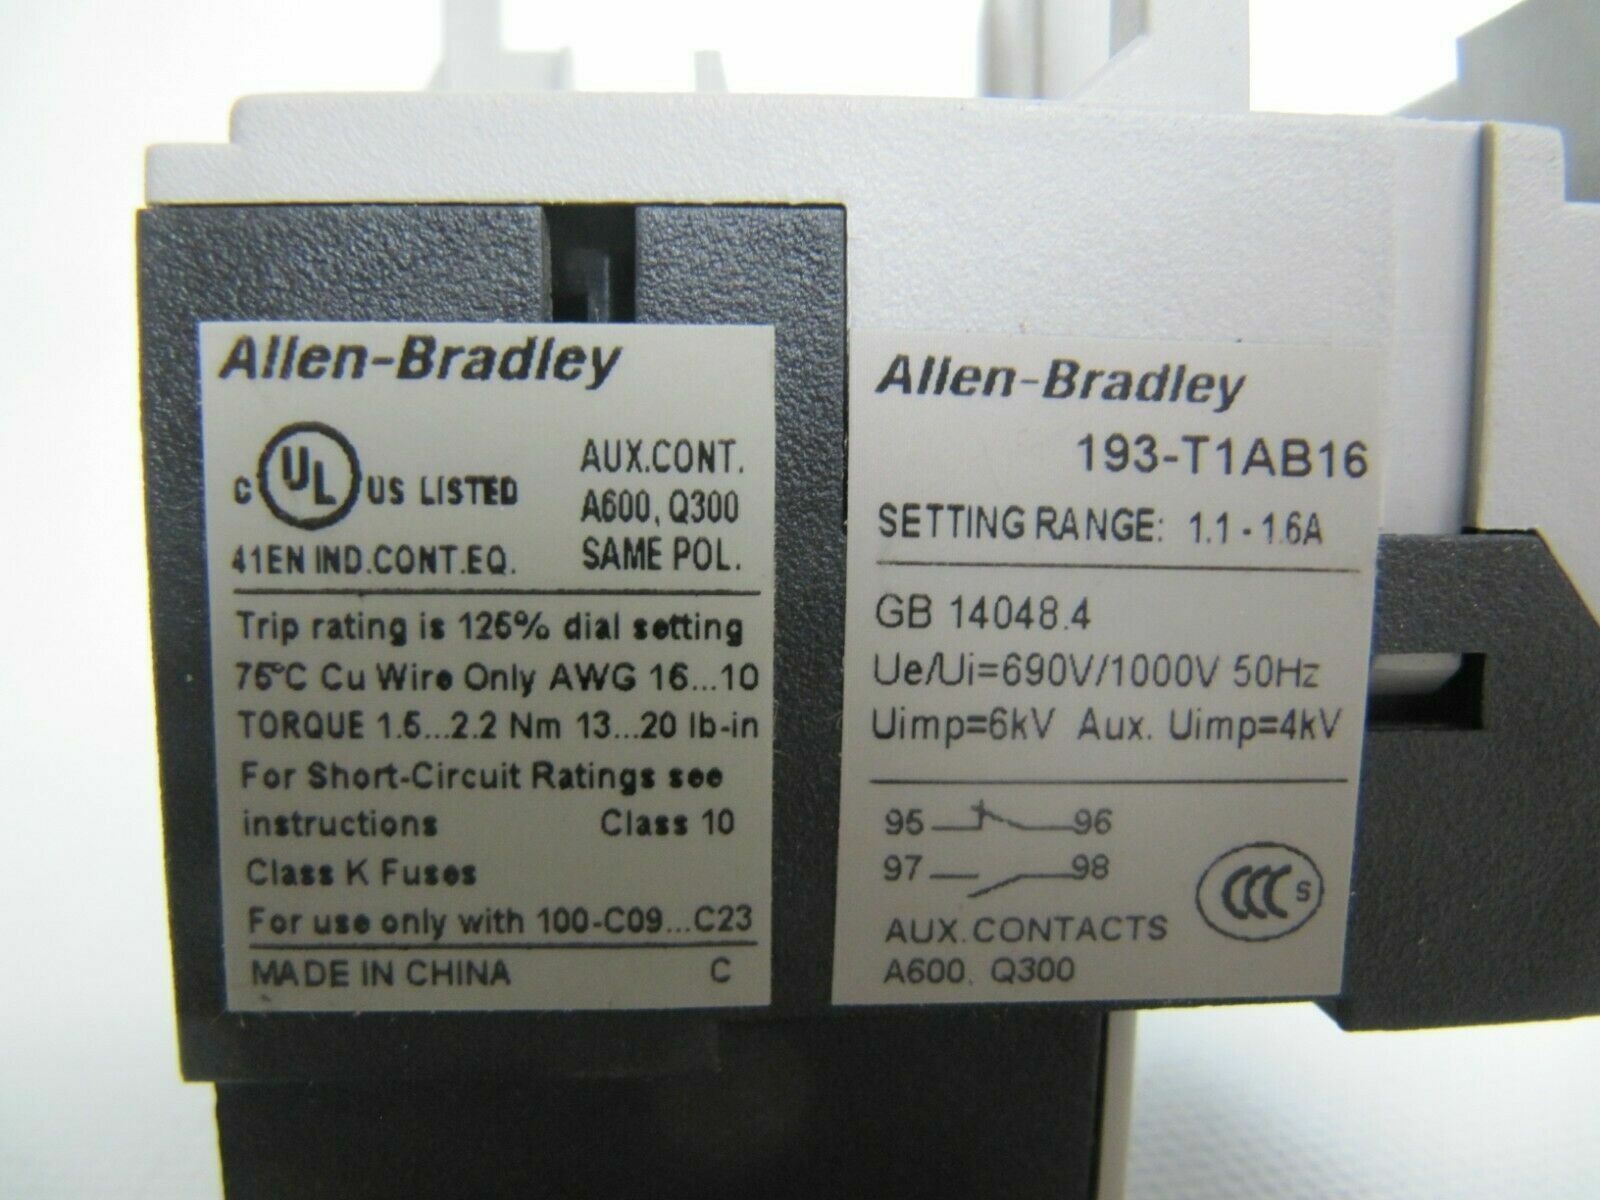 (NEW) Allen-Bradley Thermal Overload Relay 1.1-1.6A Cat. 193-T1AB16 Ser A